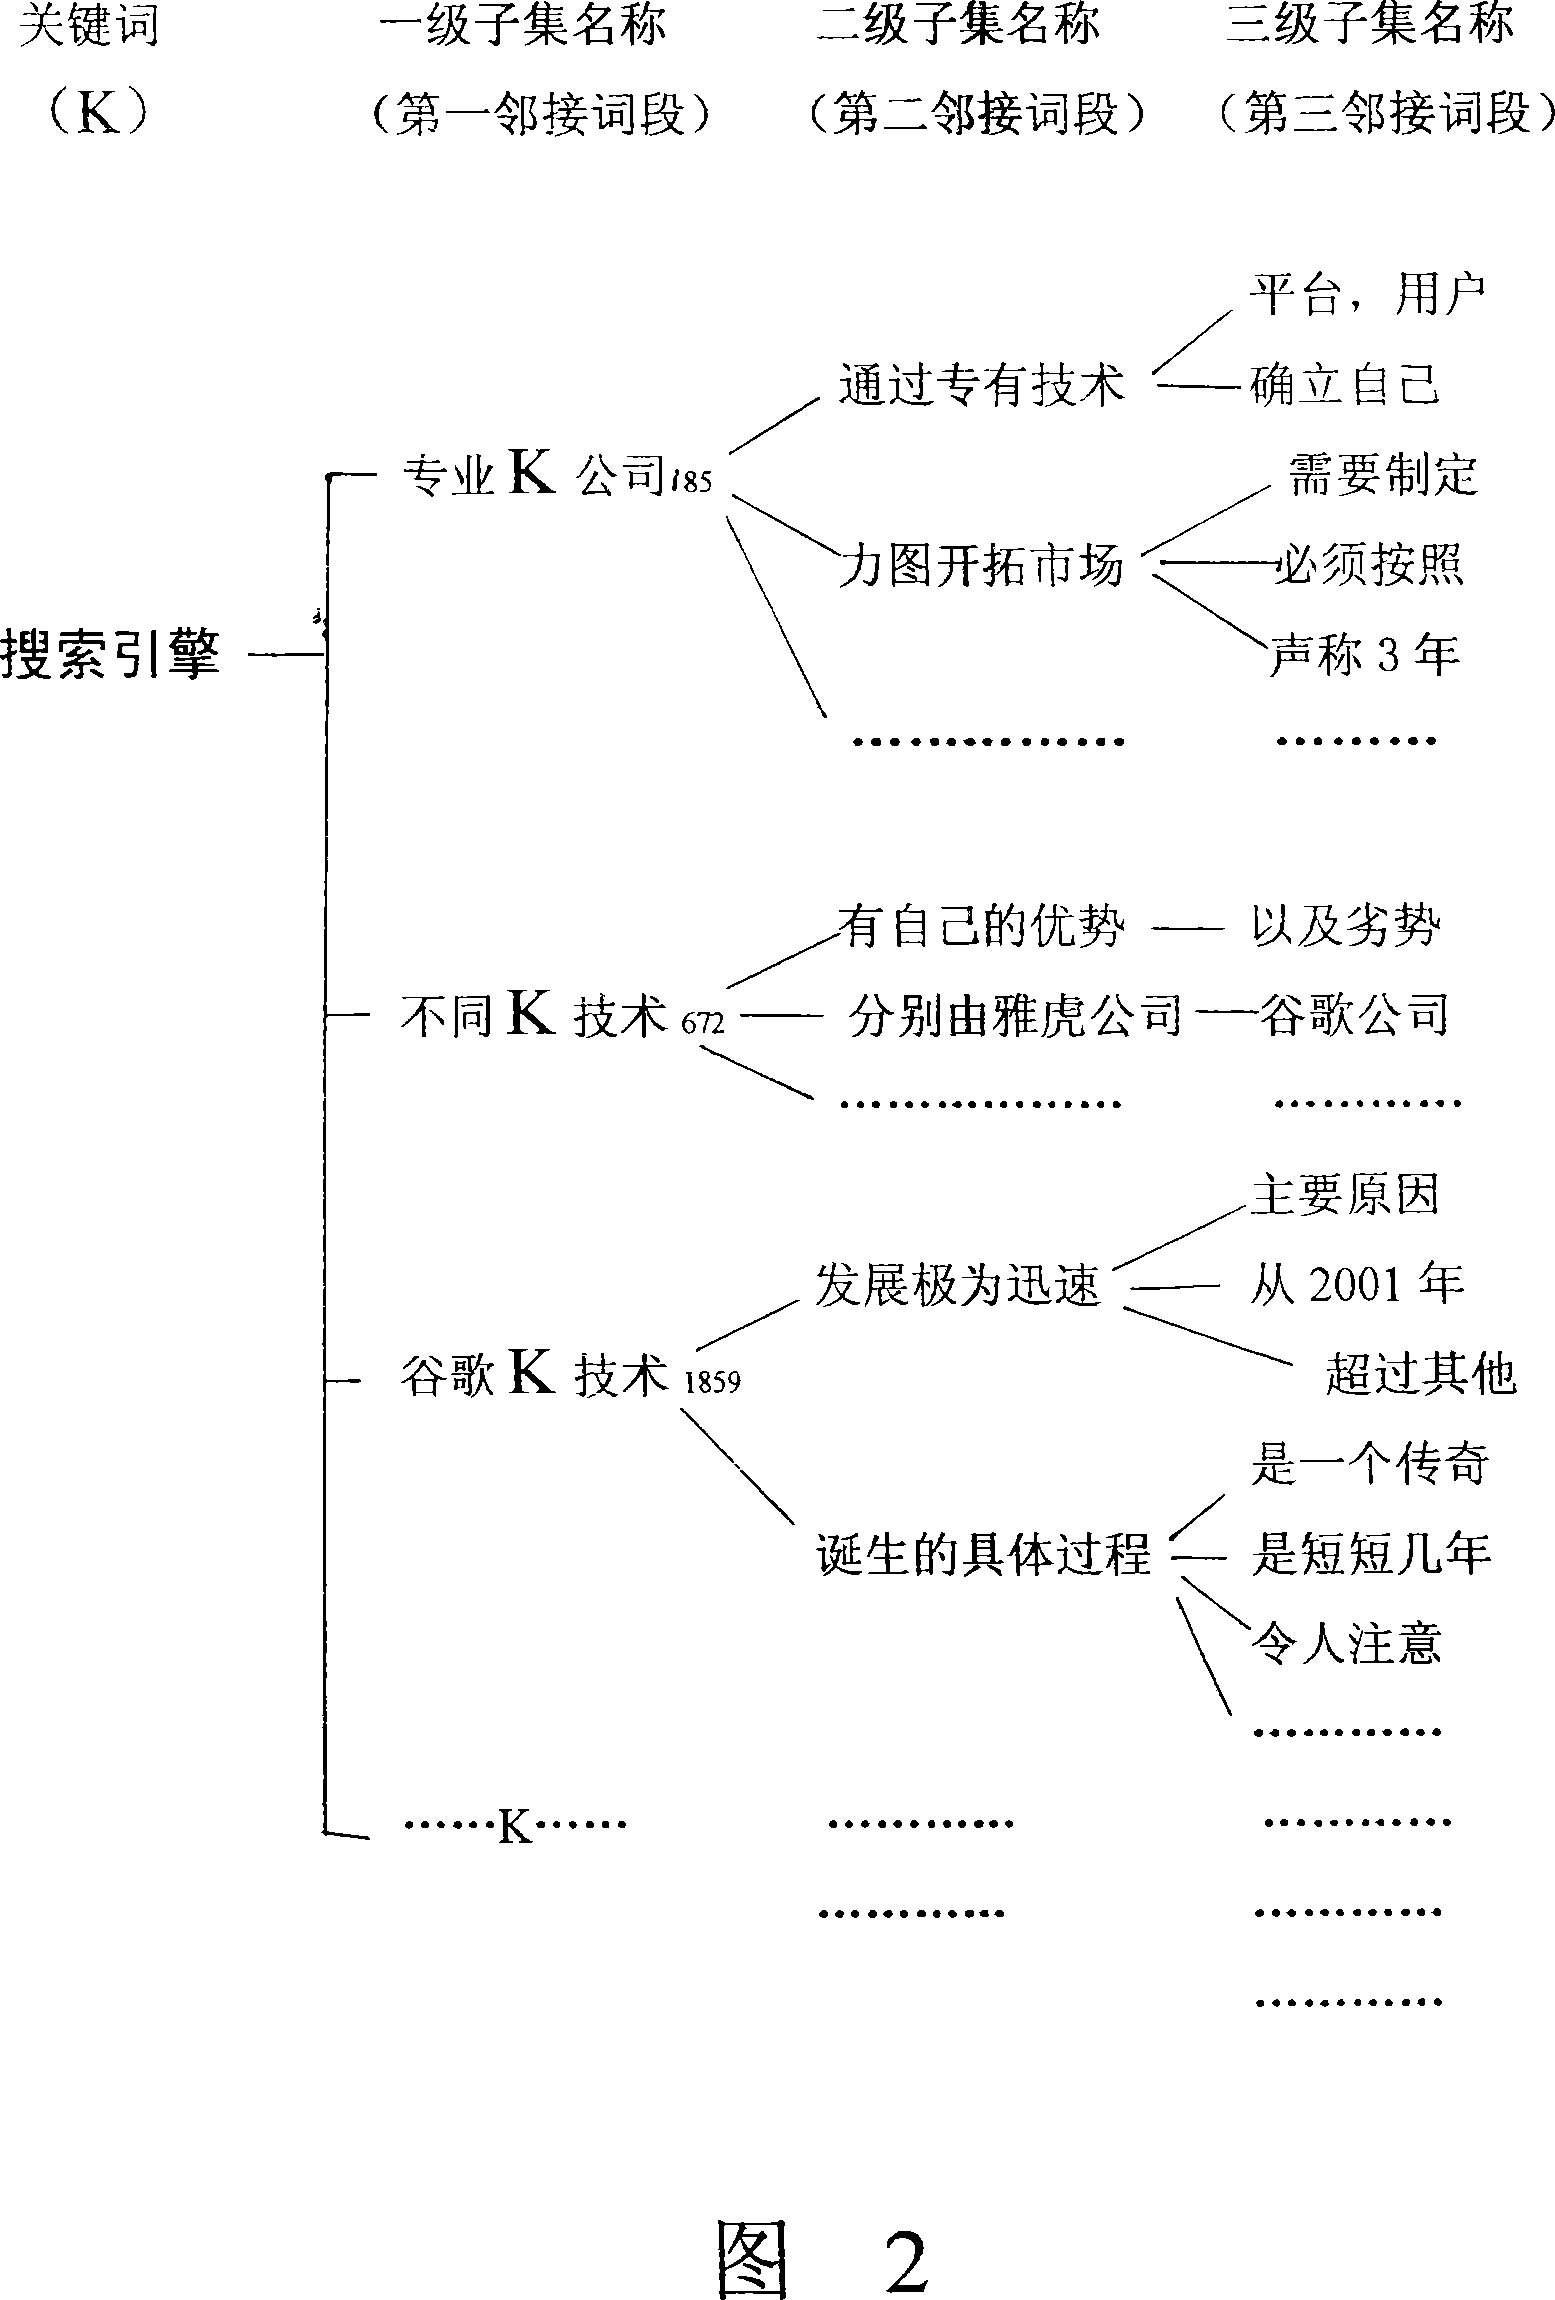 Convenient method and system for electronic text-processing and searching